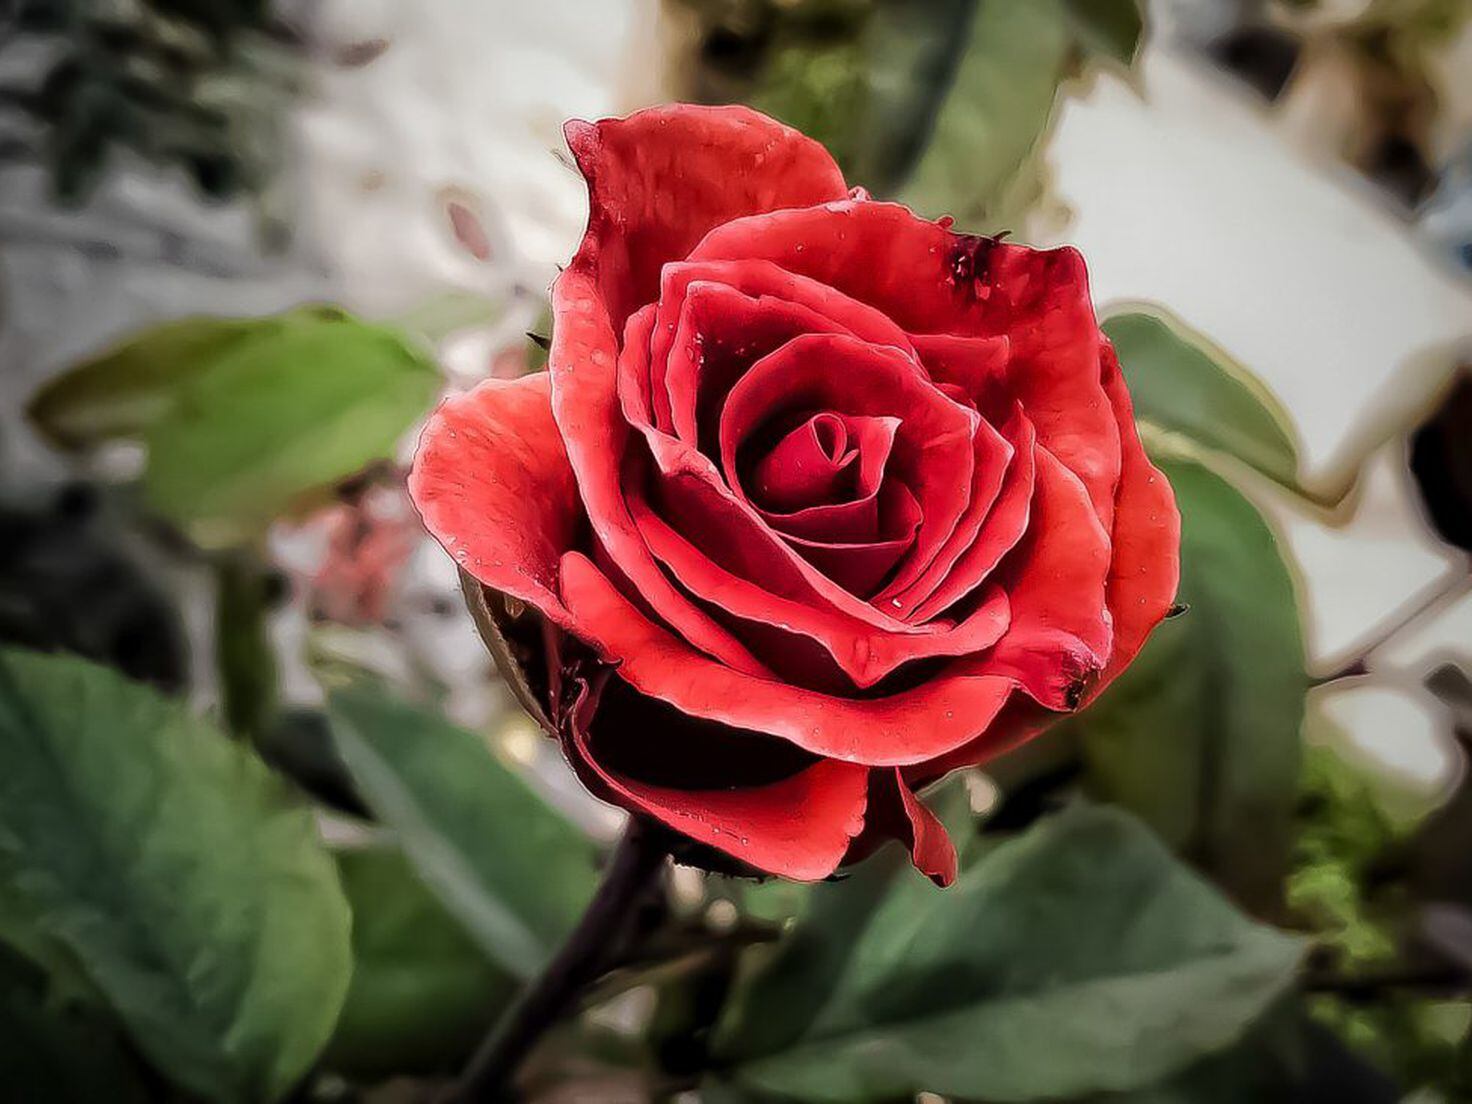 Why Do We Give Red Roses on Valentine's Day?